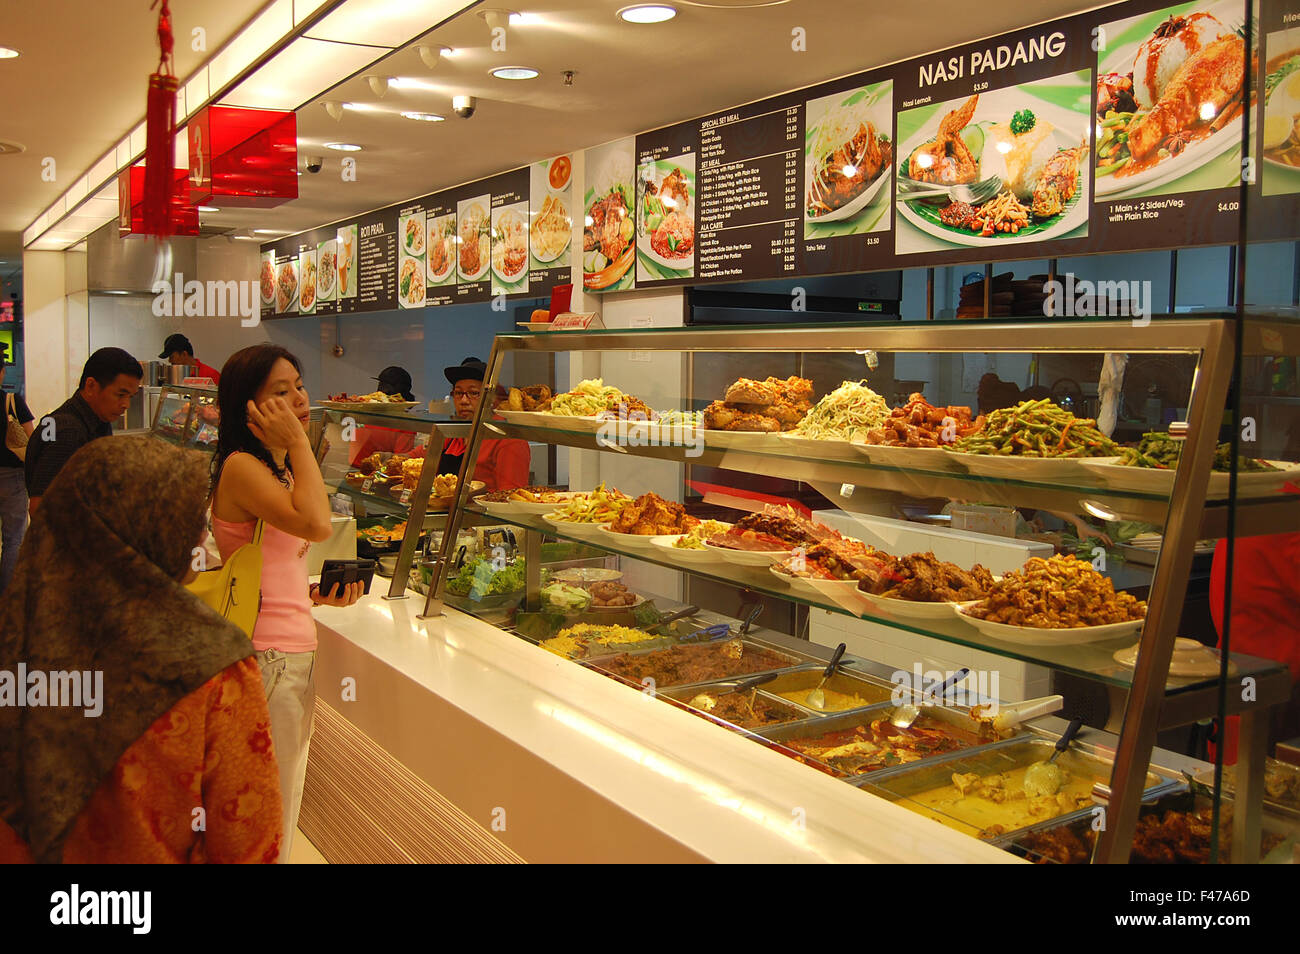 People buying Malaysian and Singaporean food at a food hall in Singapore Stock Photo